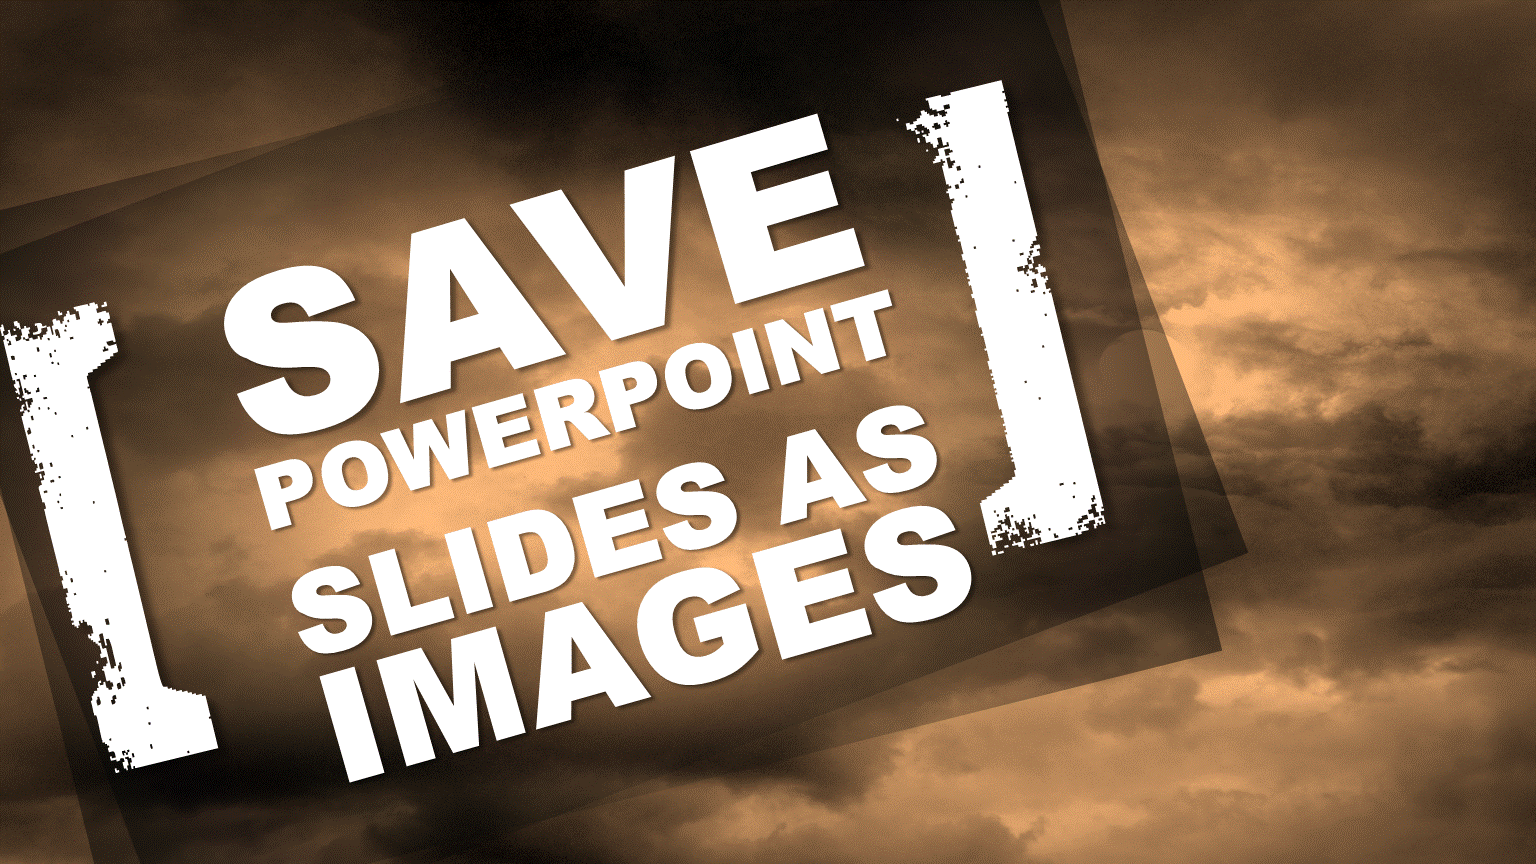 Save PowerPoint Slides As Images